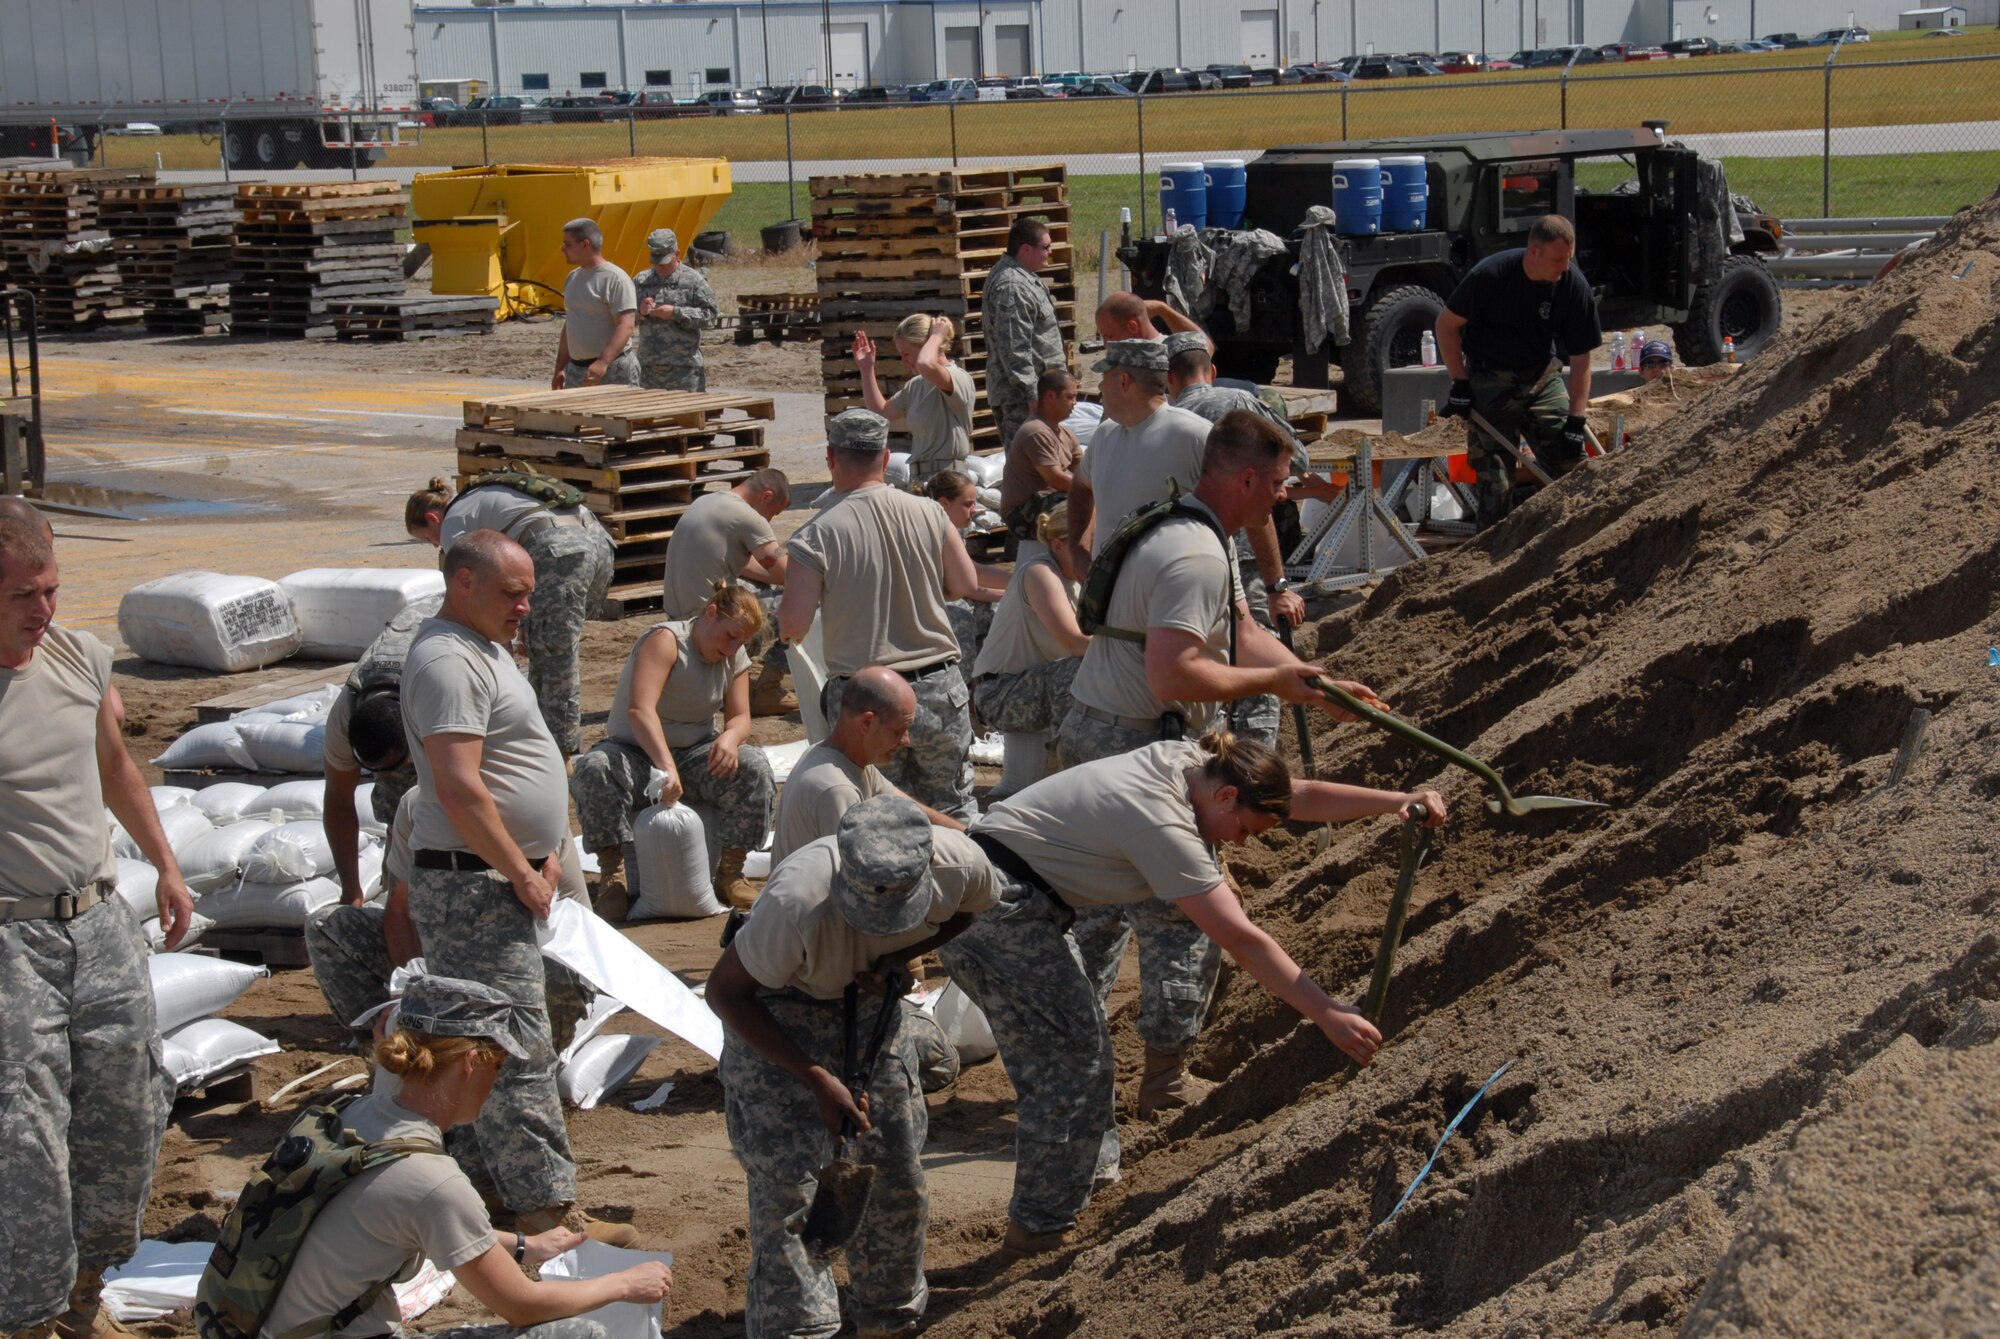 Indiana National Guardsmen filling sandbags in support of Operation Noah's Ark at Vincennes Indiana Department of Transportation on Tuesday; 10; June 2008. (U.S. Air Force photo by Senior Master Sgt. John S. Chapman) 